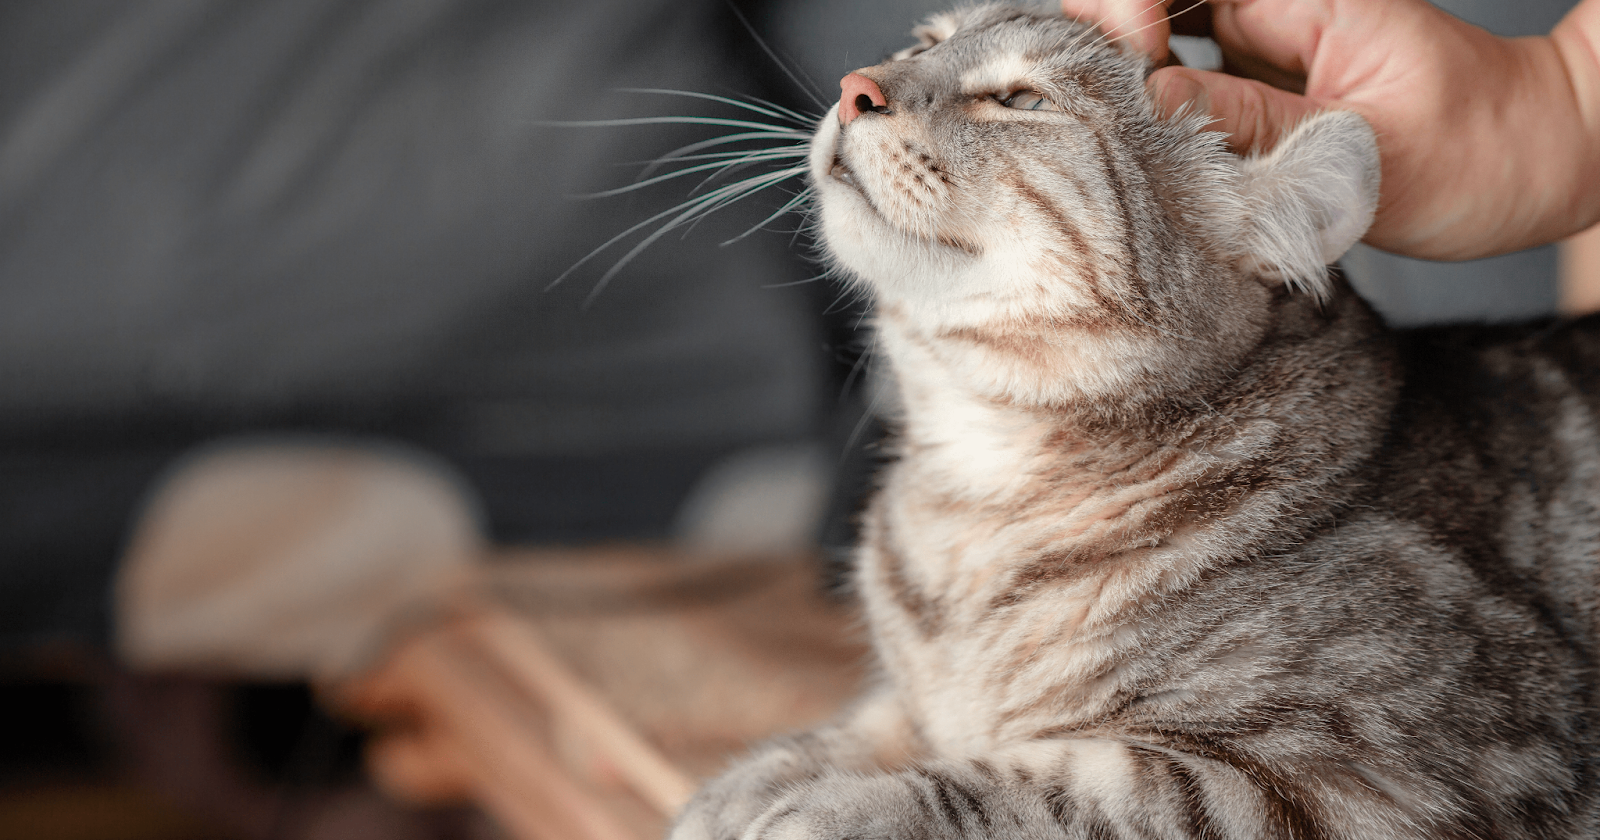 Light grey tabby cat happily receiving head scratches